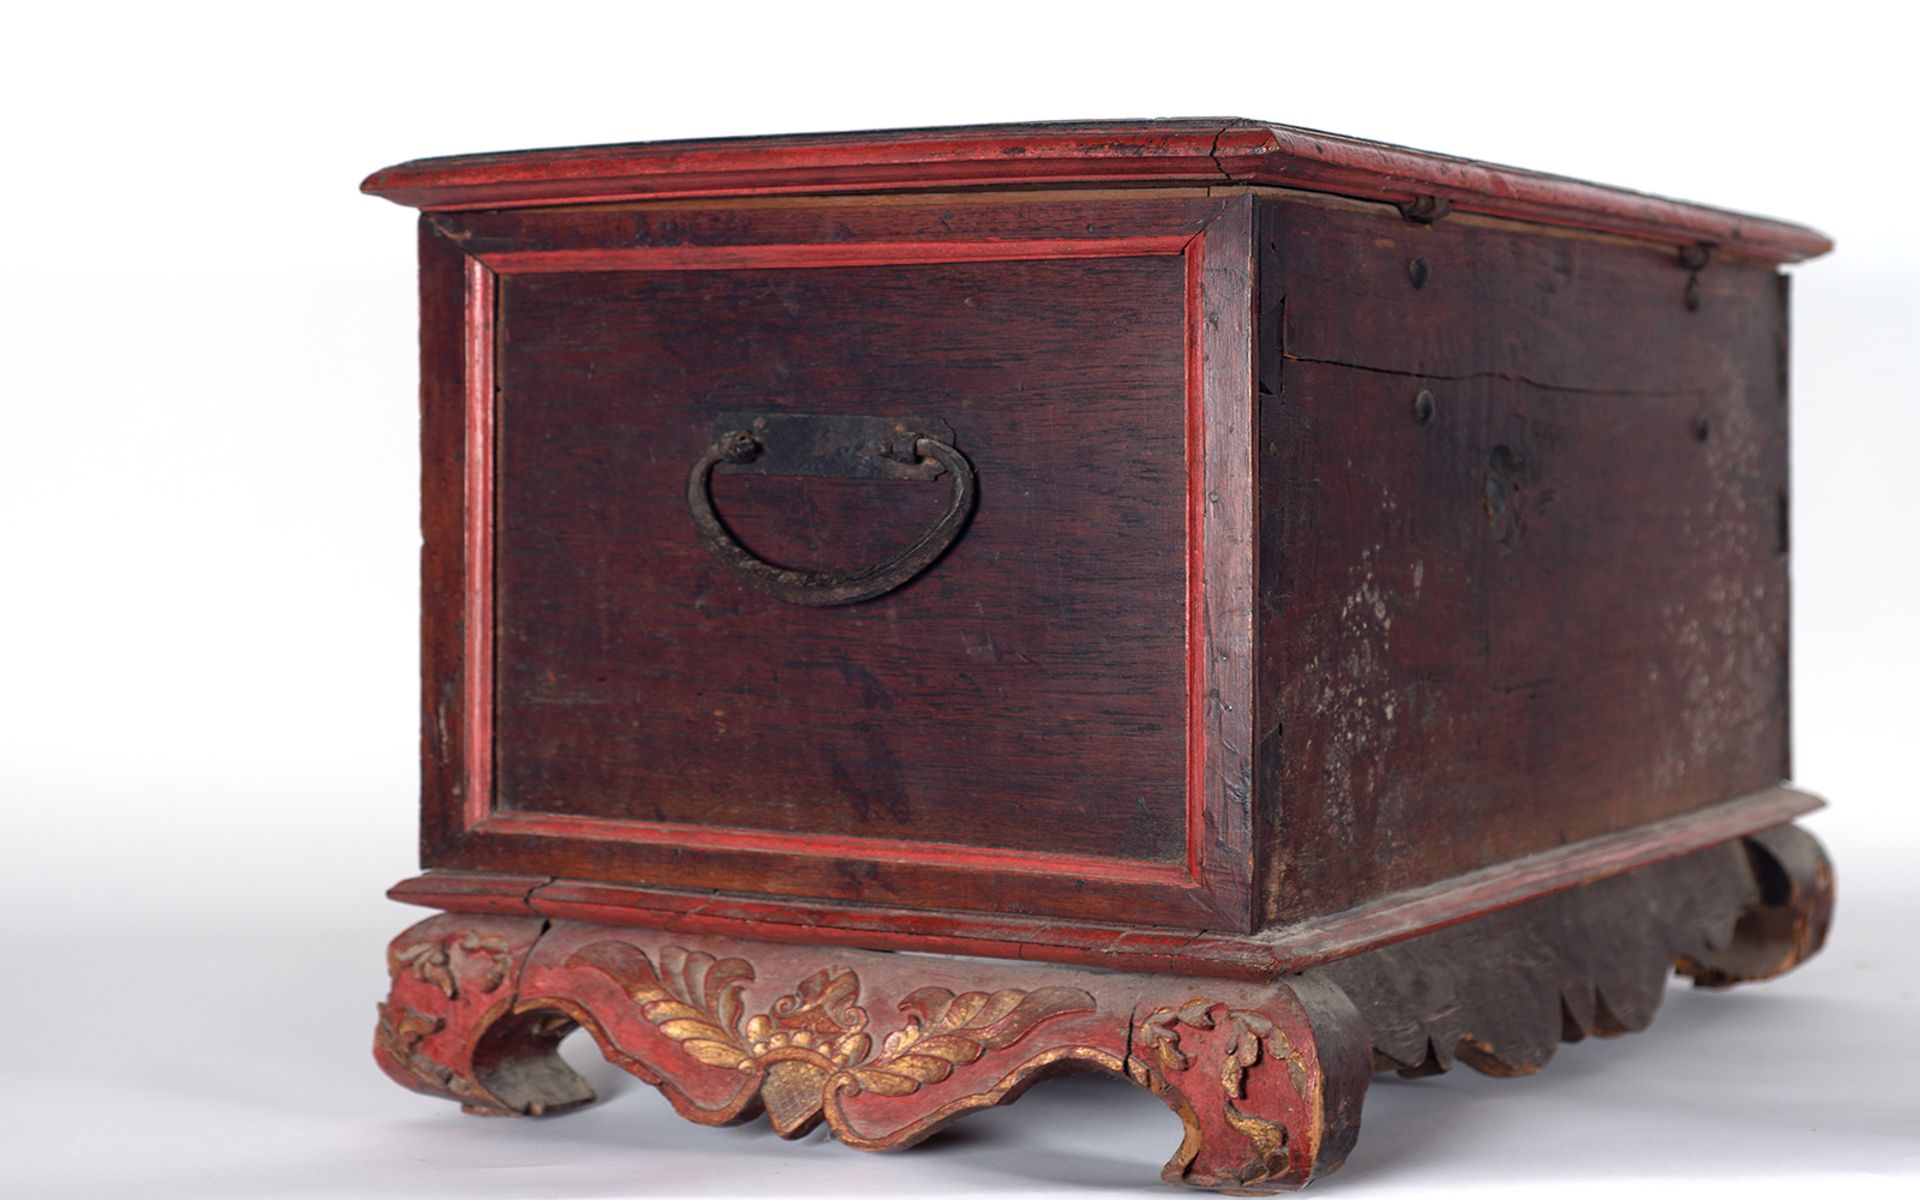 Important Mexican coffer, Viceroyalty of New Spain, 18th century - Image 3 of 4